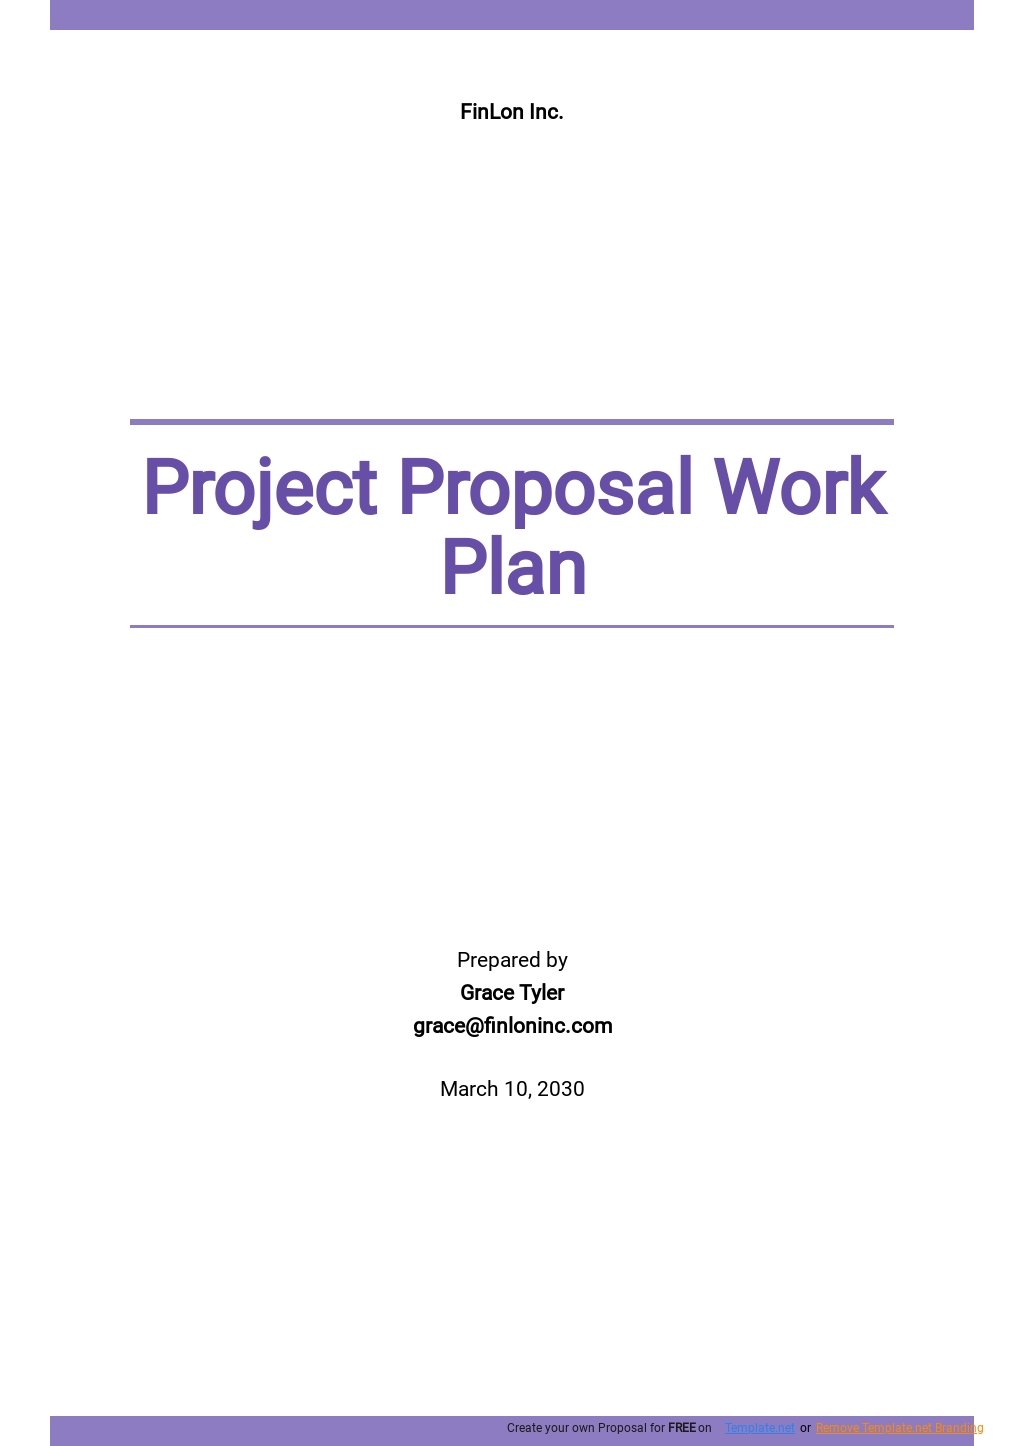 Project Proposal Work Plan Template Google Docs, Word, Apple Pages